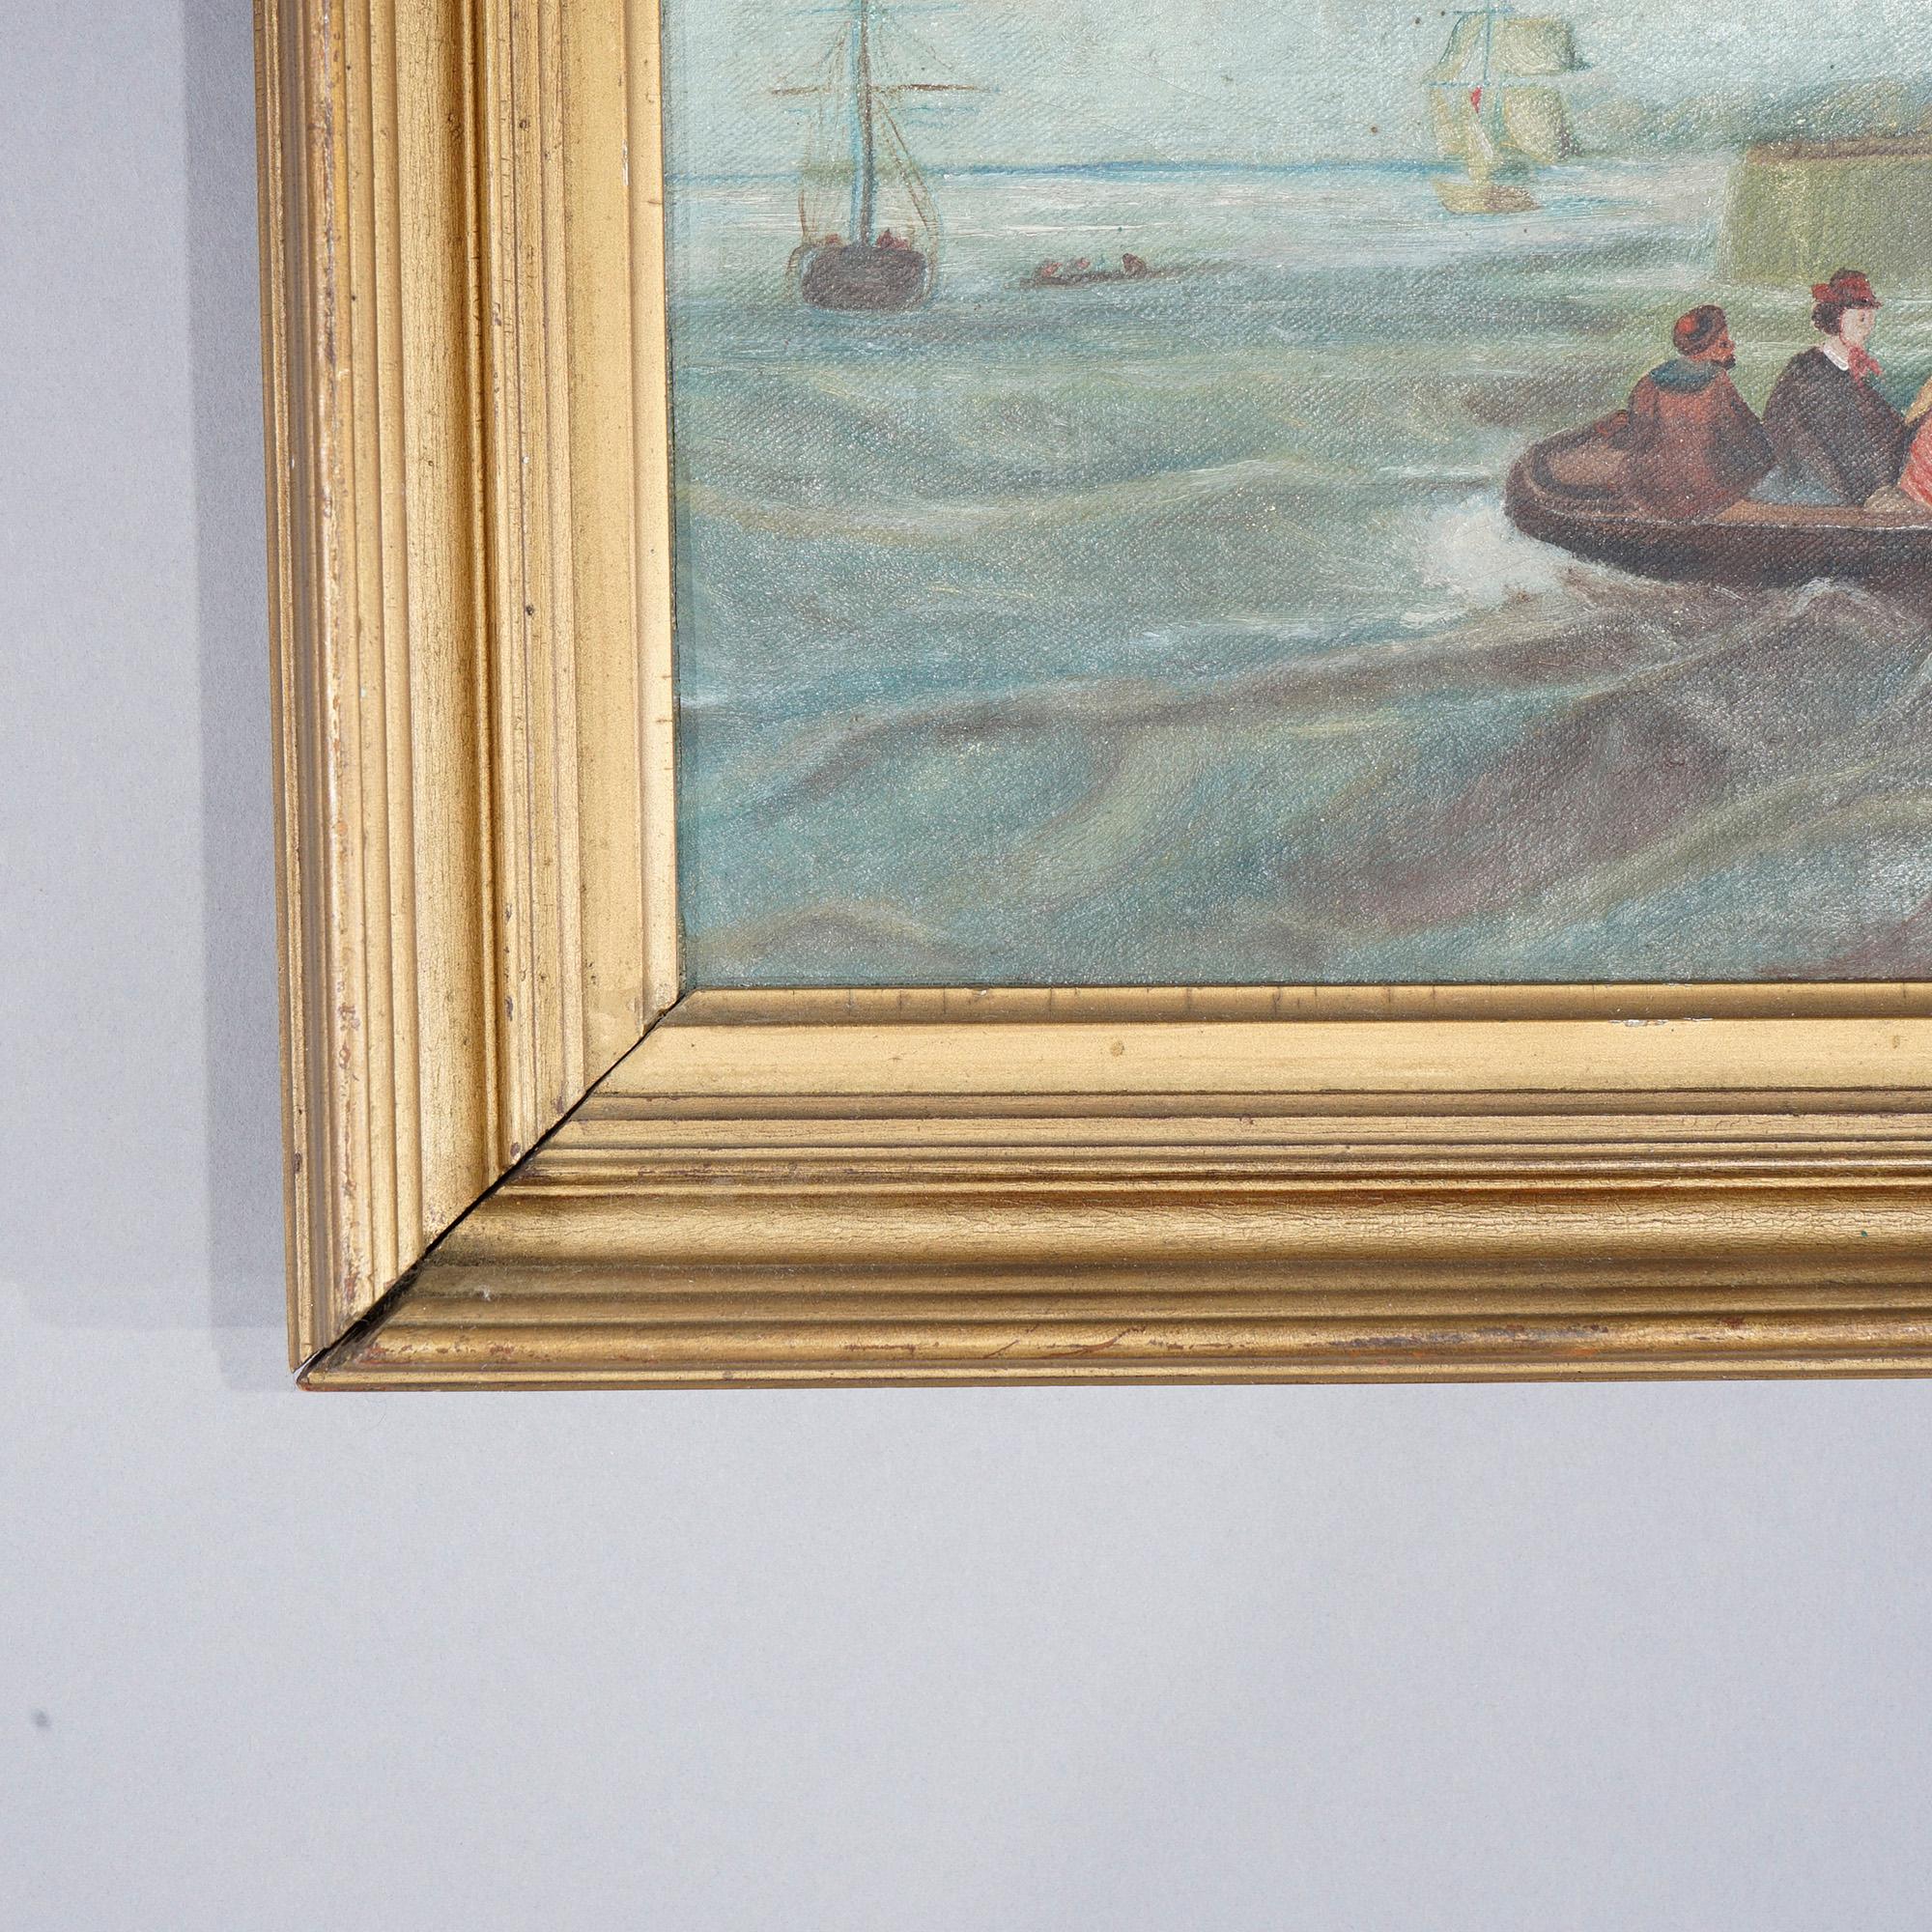 Antique Painting, Harbor Scene with Boats, Figures & Lighthouse, 19th C 1